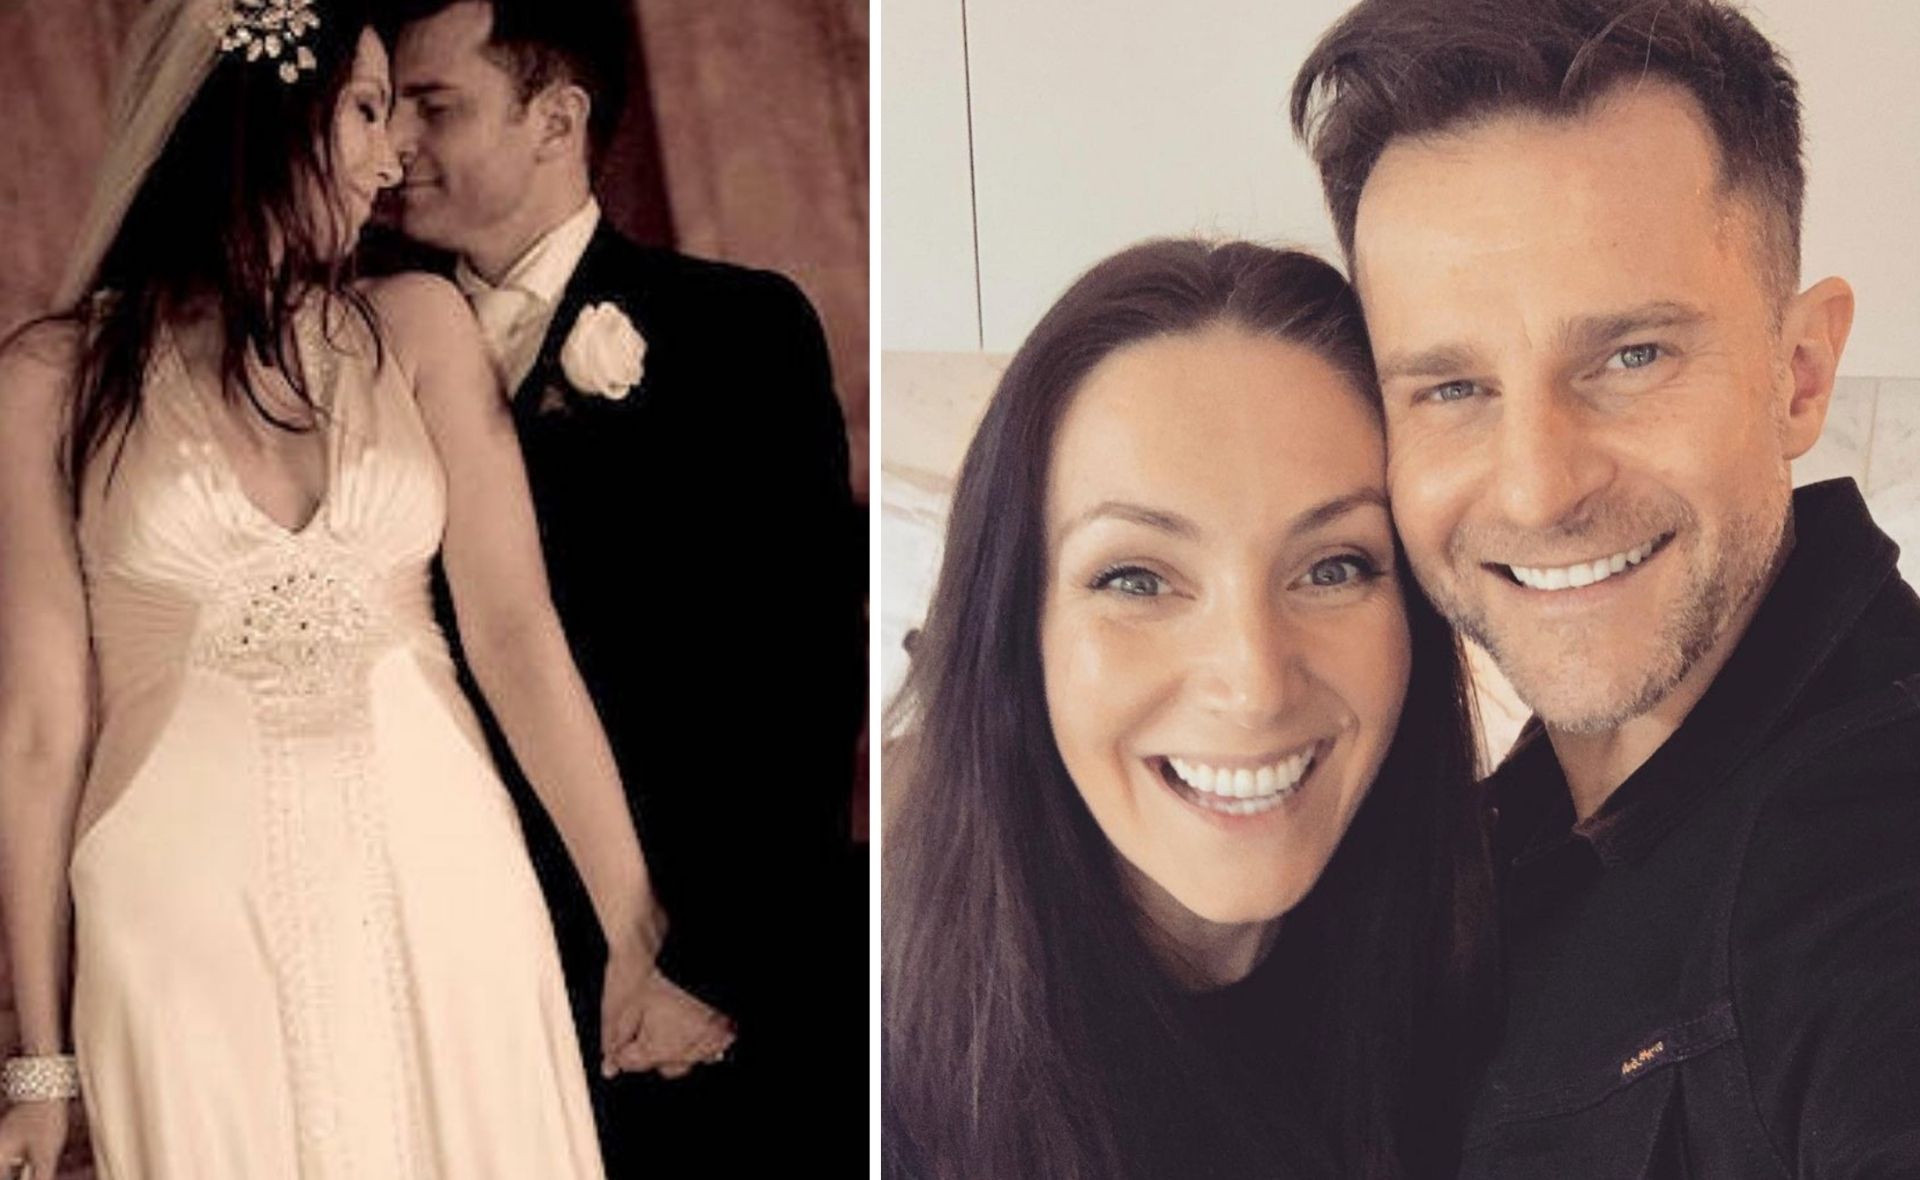 David Campbell and his wife Lisa celebrate their 15th wedding anniversary